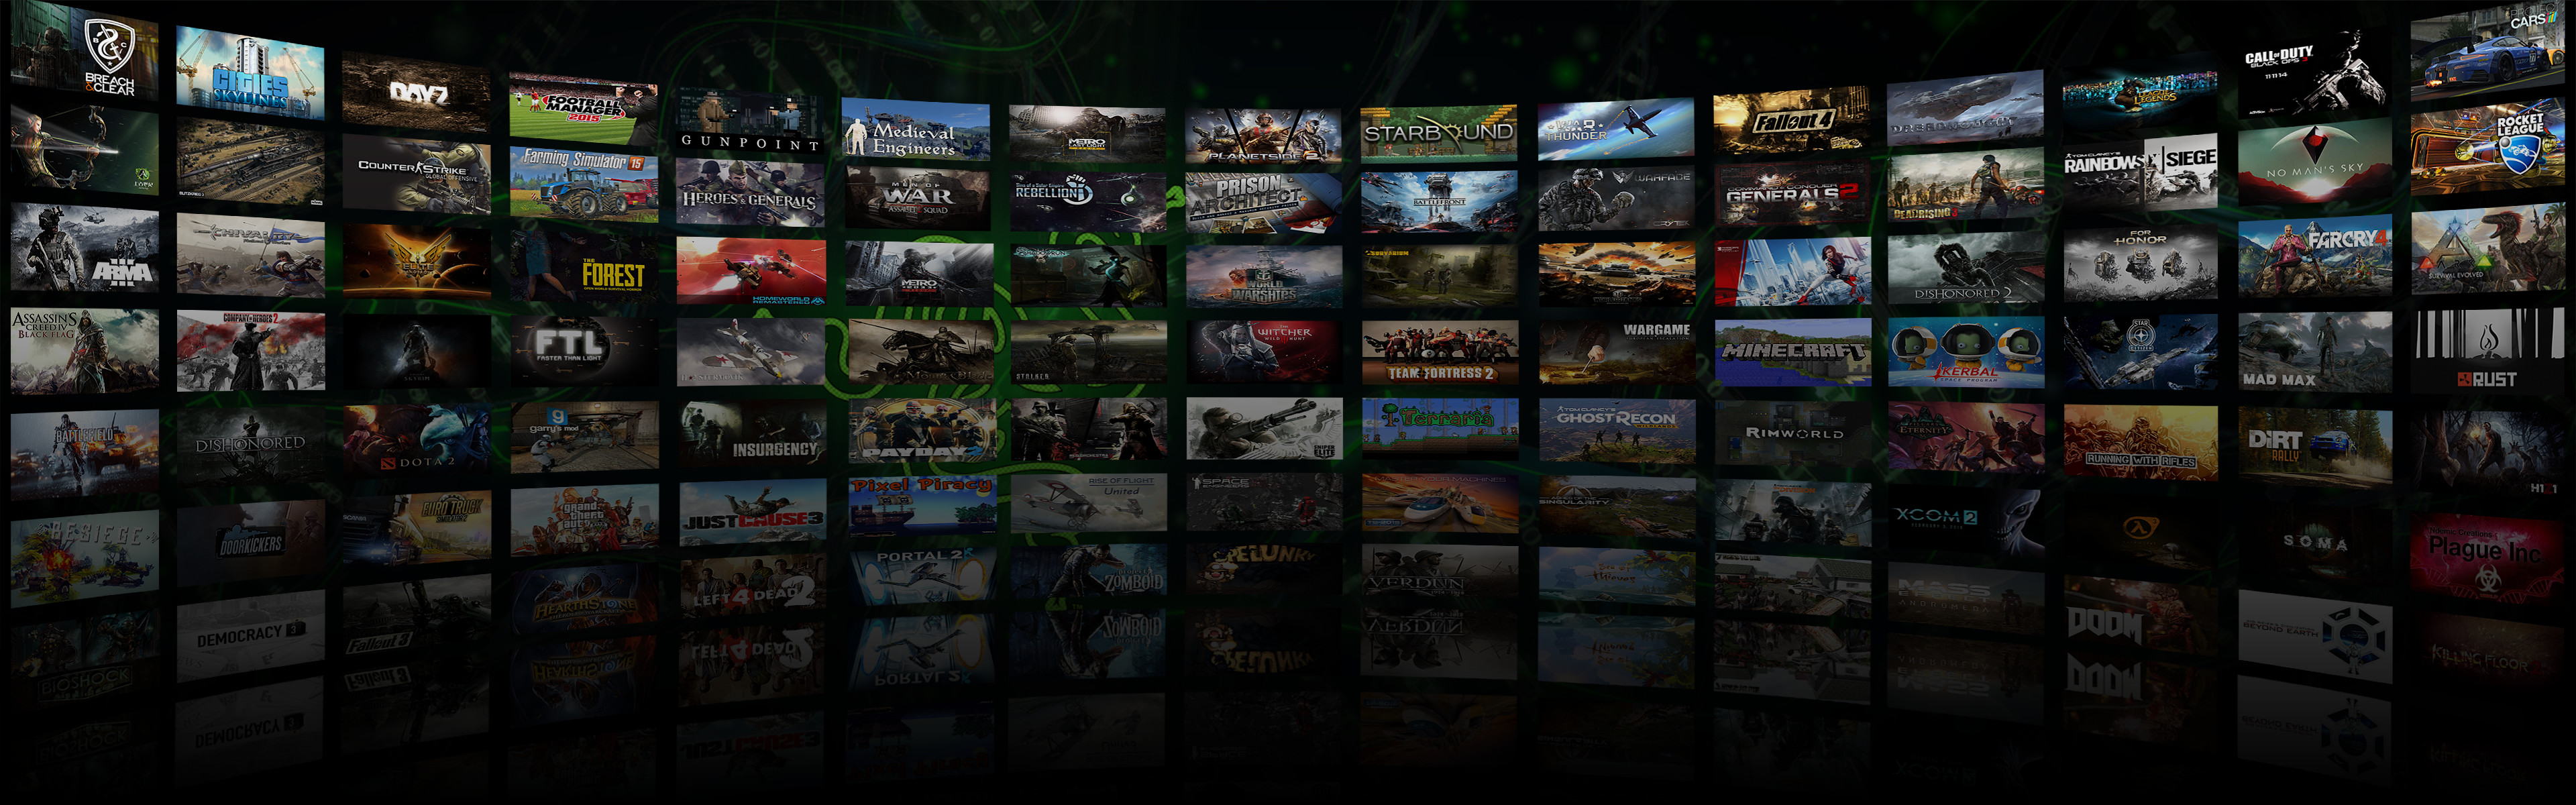 3840x1200 ... Dual Monitor Game Montage Wallpaper 3 by DarkXess